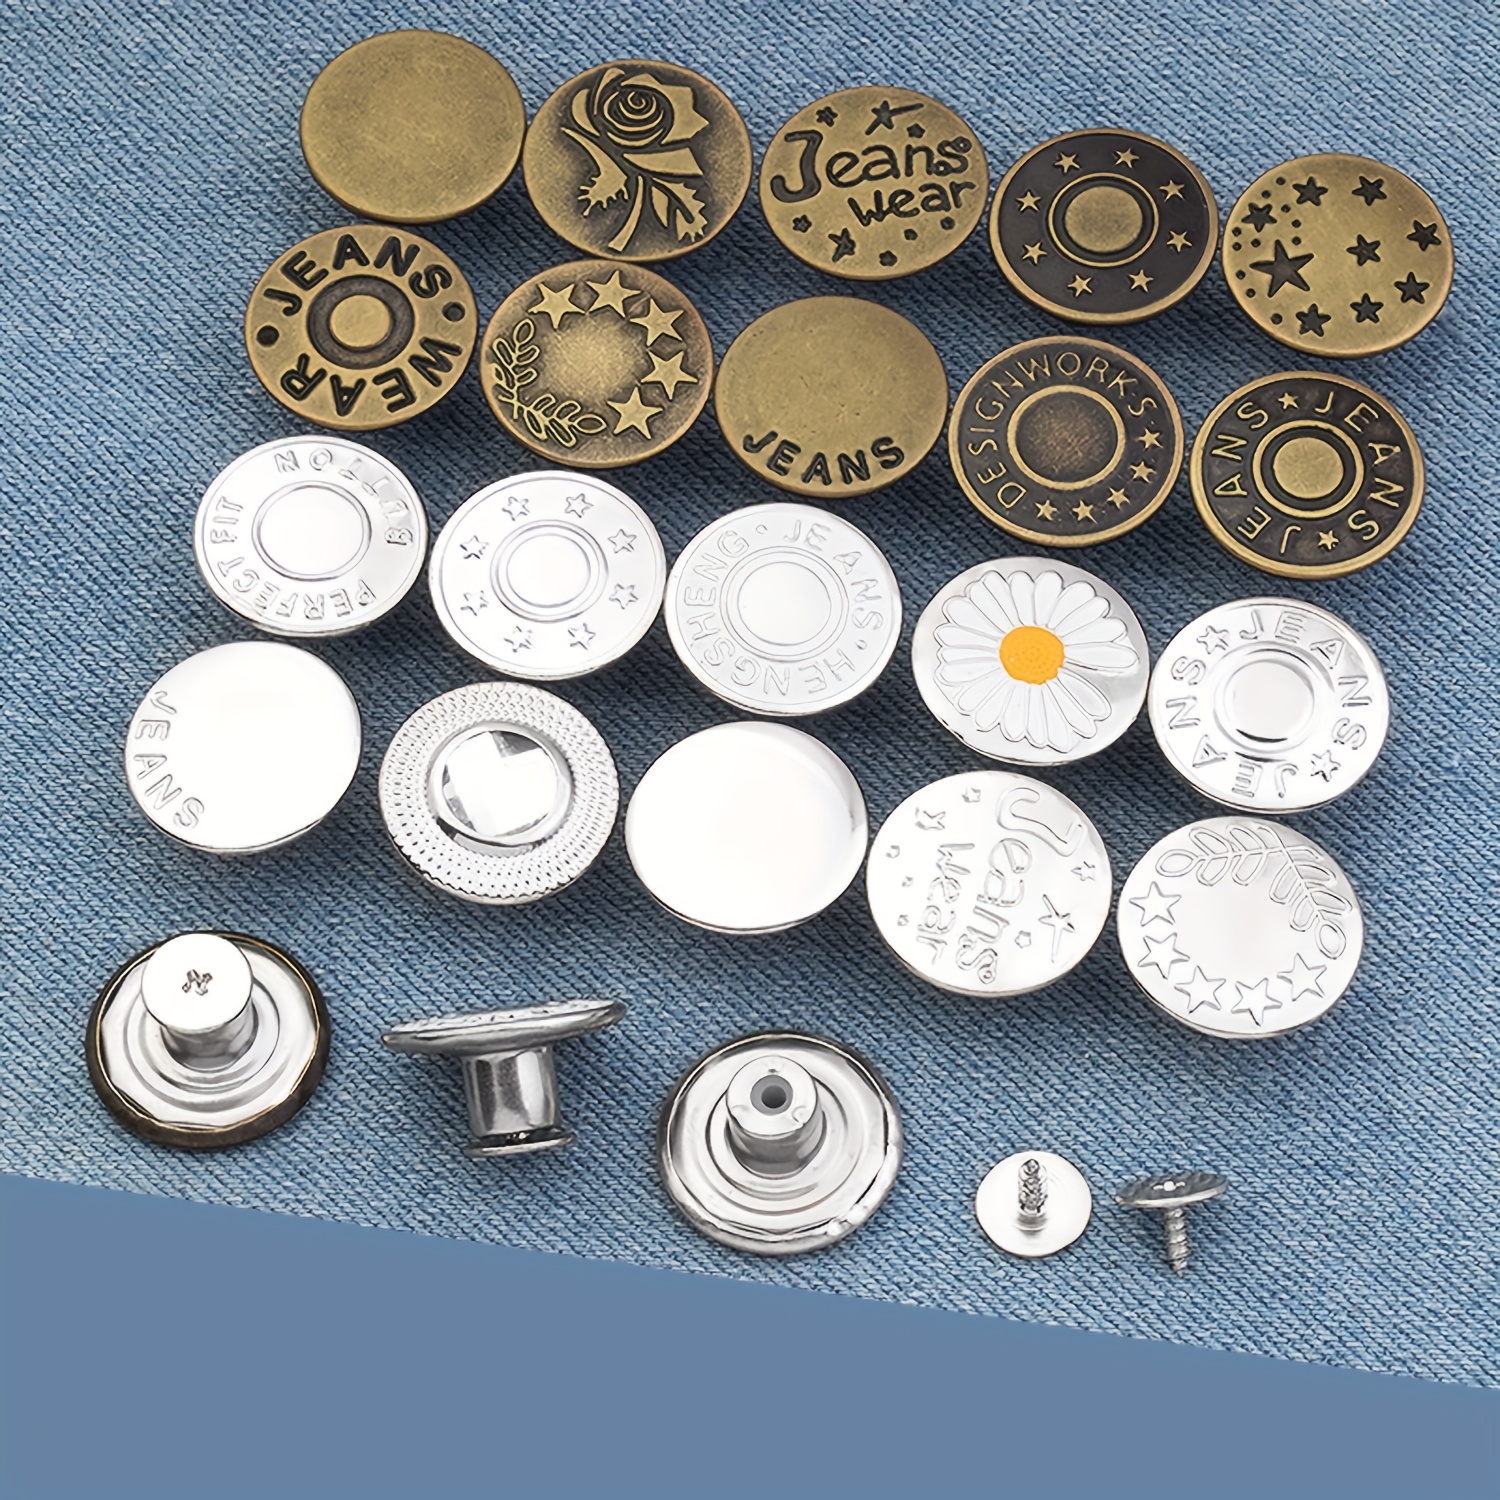 6pcs Jeans Buttons Replacement 17mm No Sewing Metal Button Repair